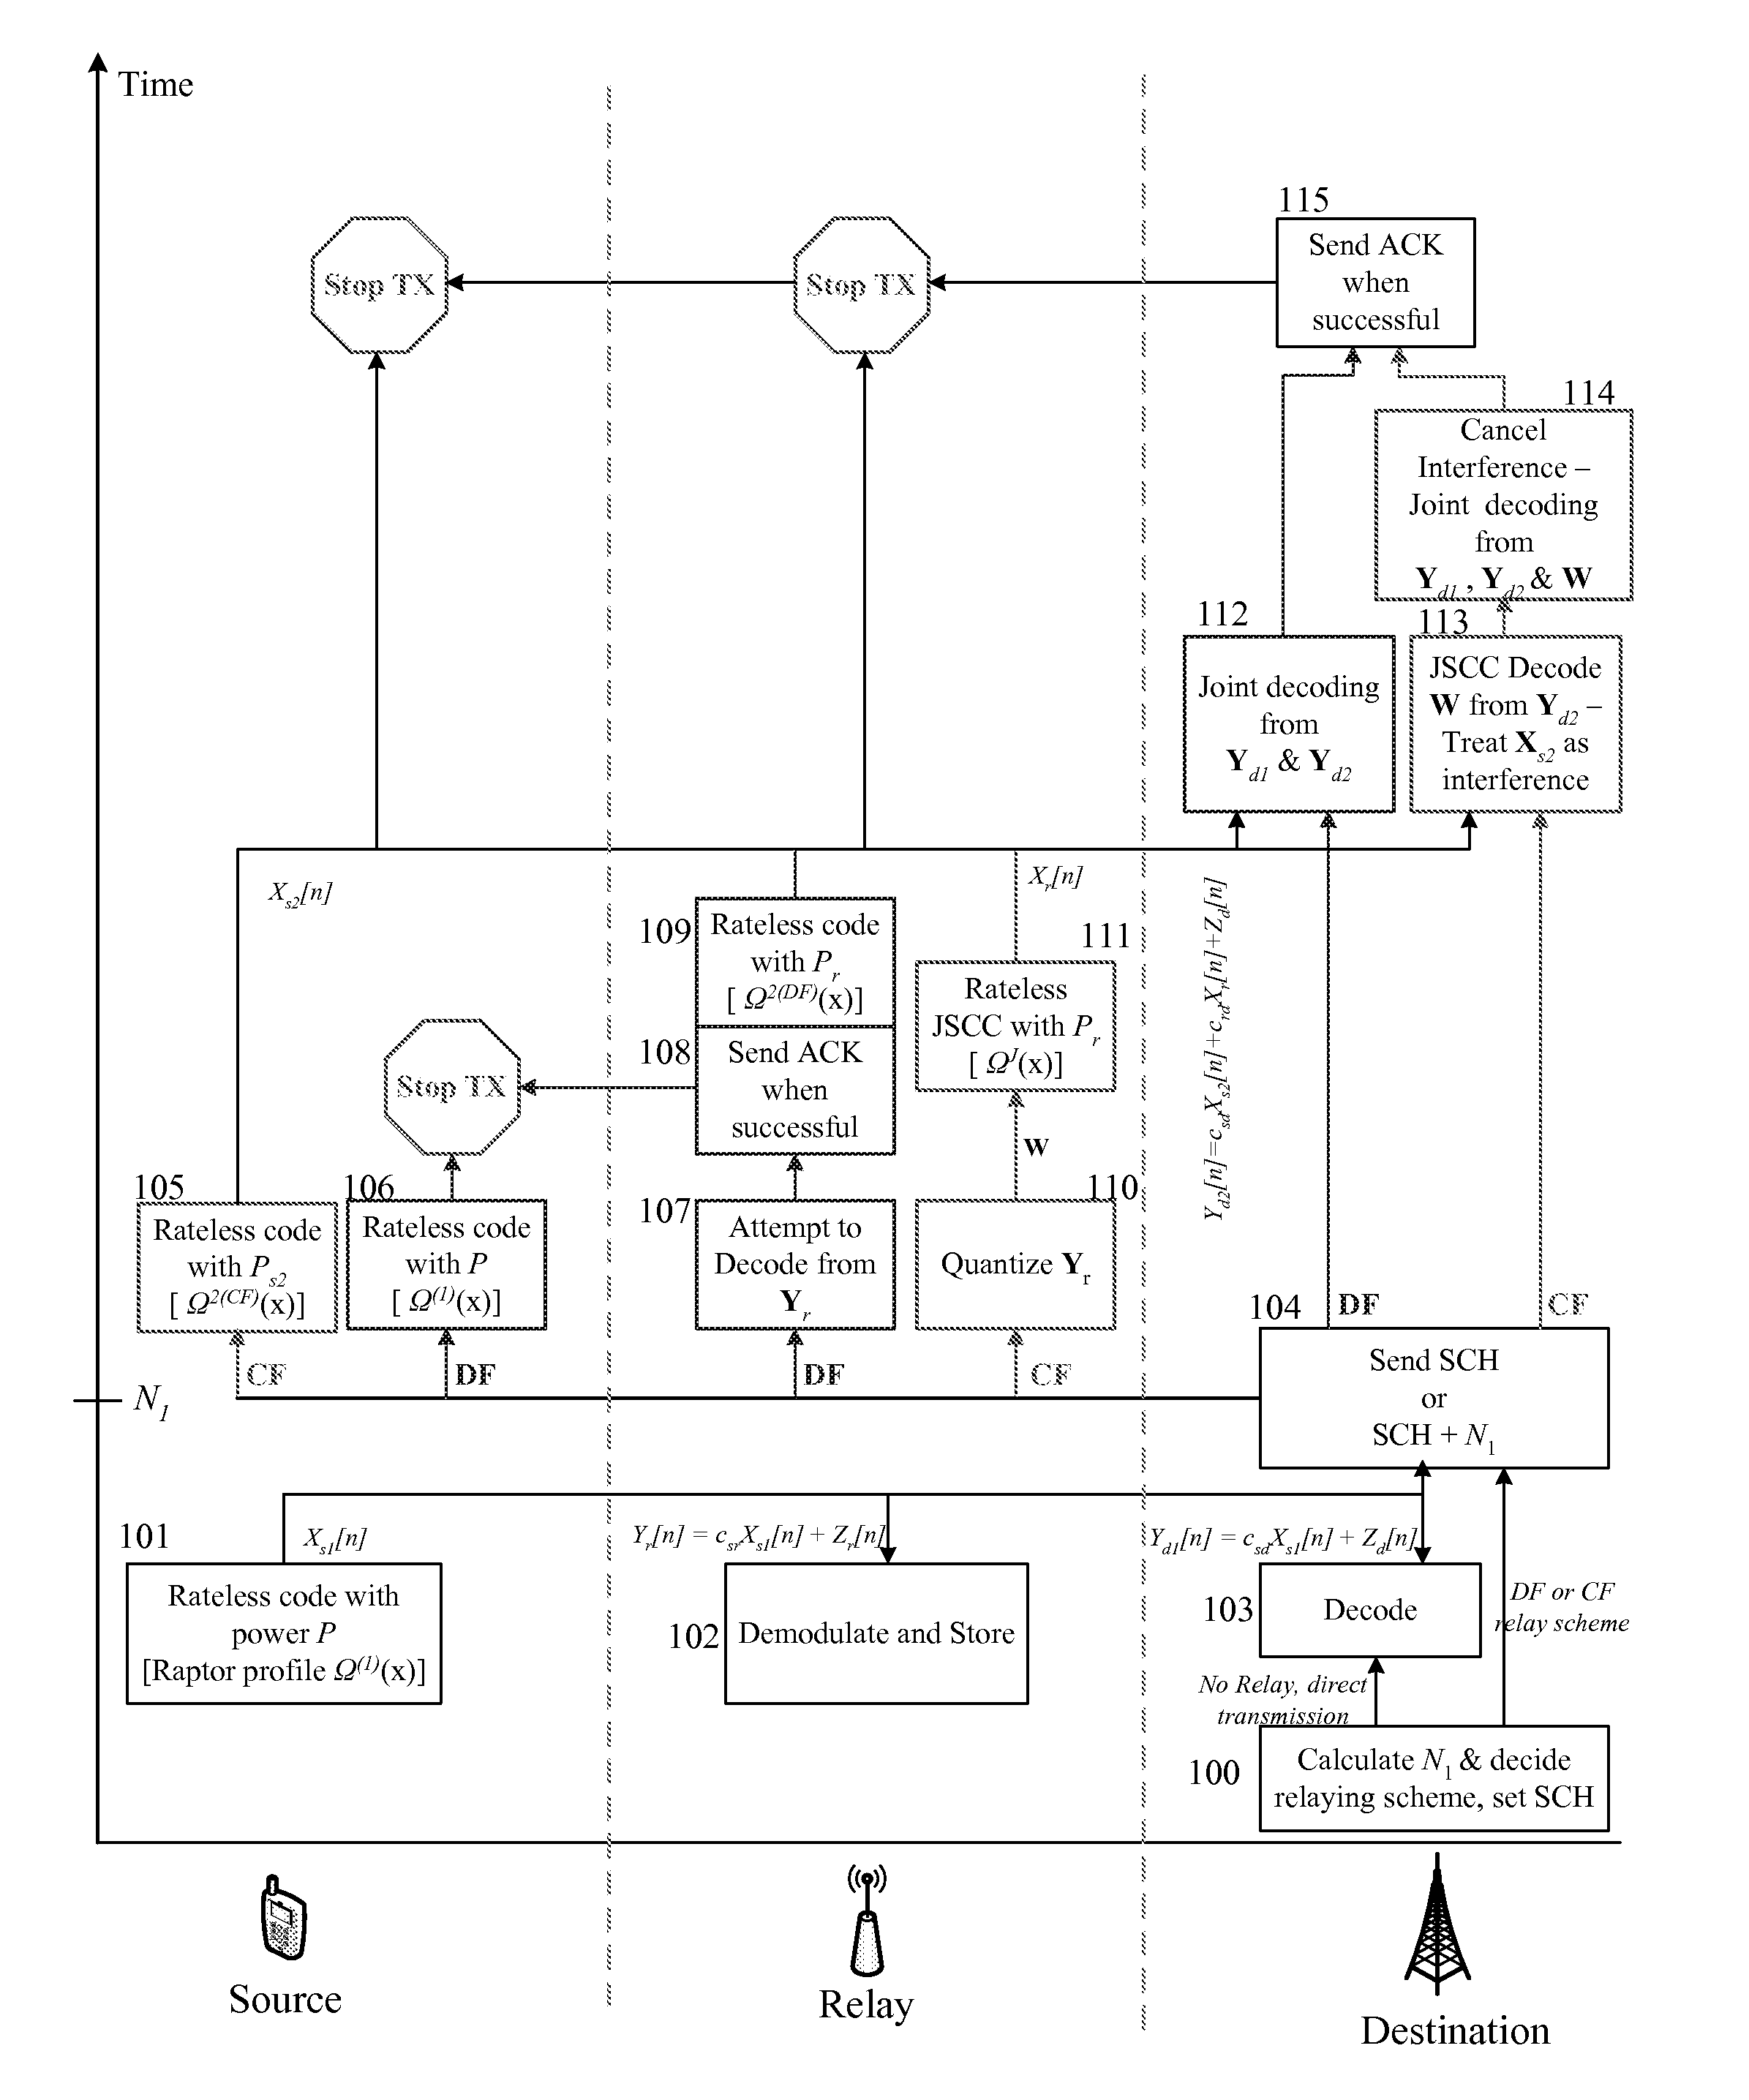 Transmission for half-duplex relay in fading channel and rateless code configuration